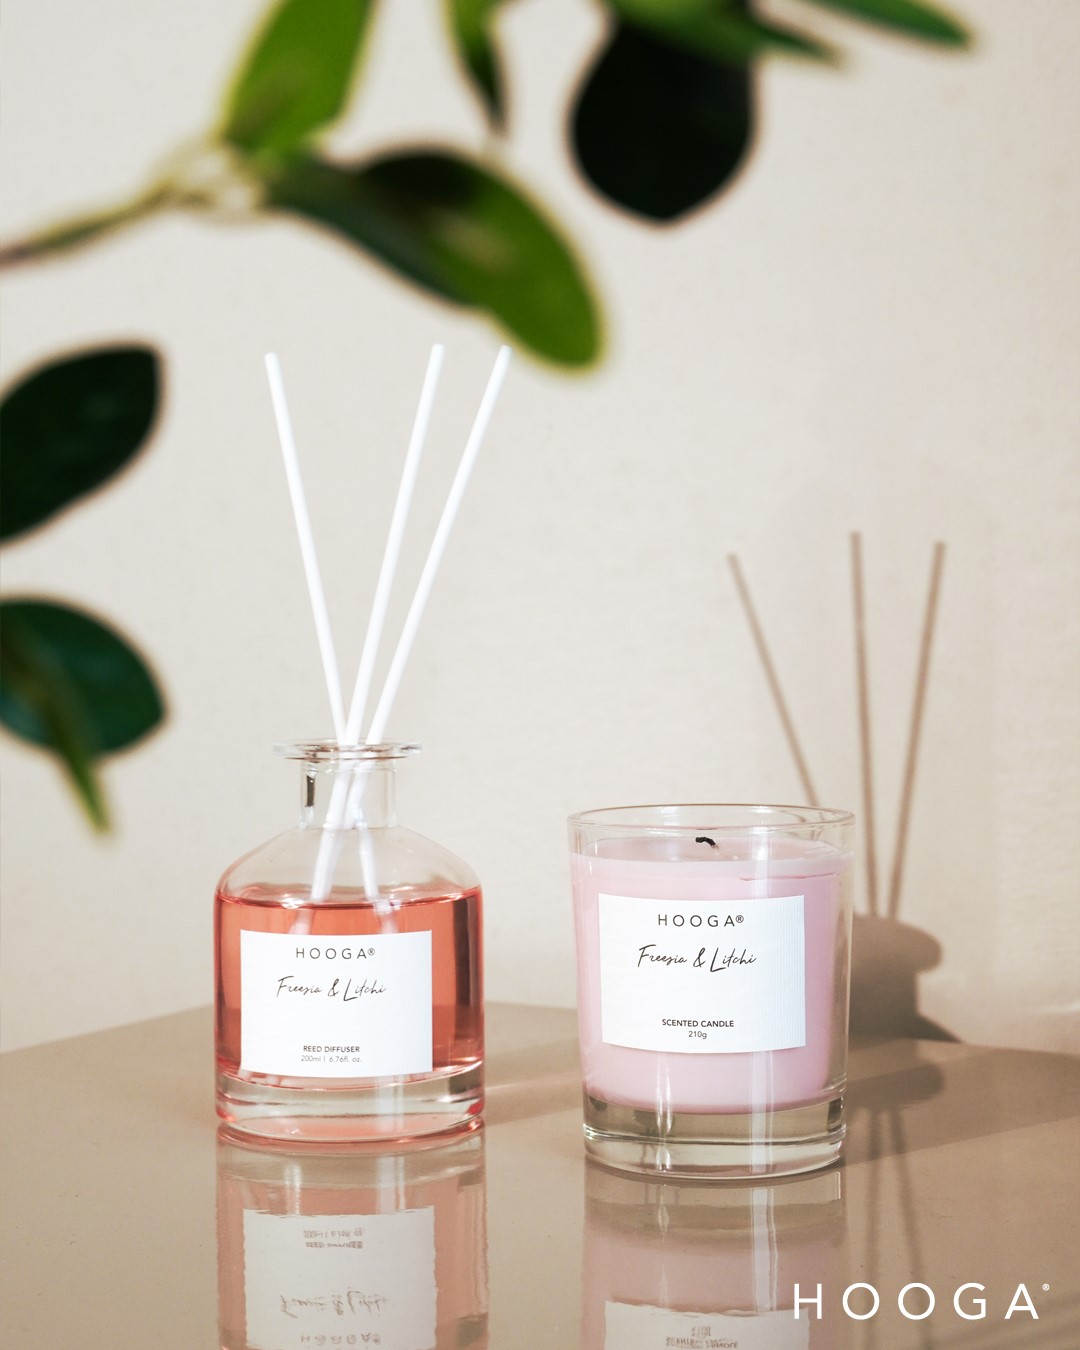 6 Christmas Gift Ideas Below $20 To Give Homeowner Singaporeans A Cosy, IG-Worthy Space - Gourmand Reed Diffuser HOOGA